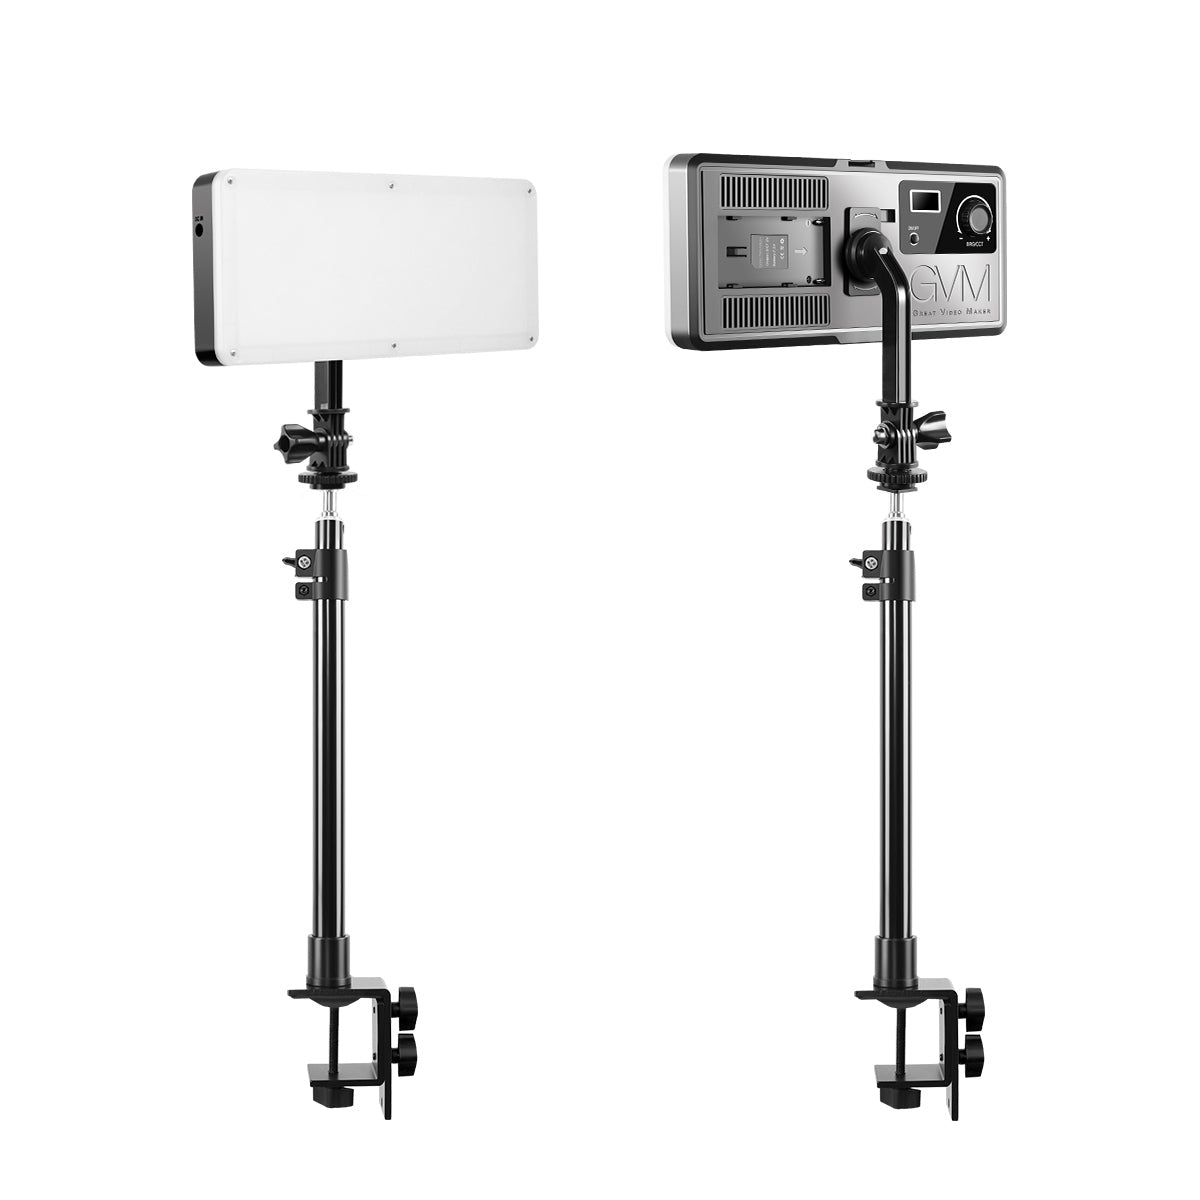 GVM On-Camera Bi-color LED Video Light 2-Light Kit with Bluetooth App Control & Power Supplies - GVMLED